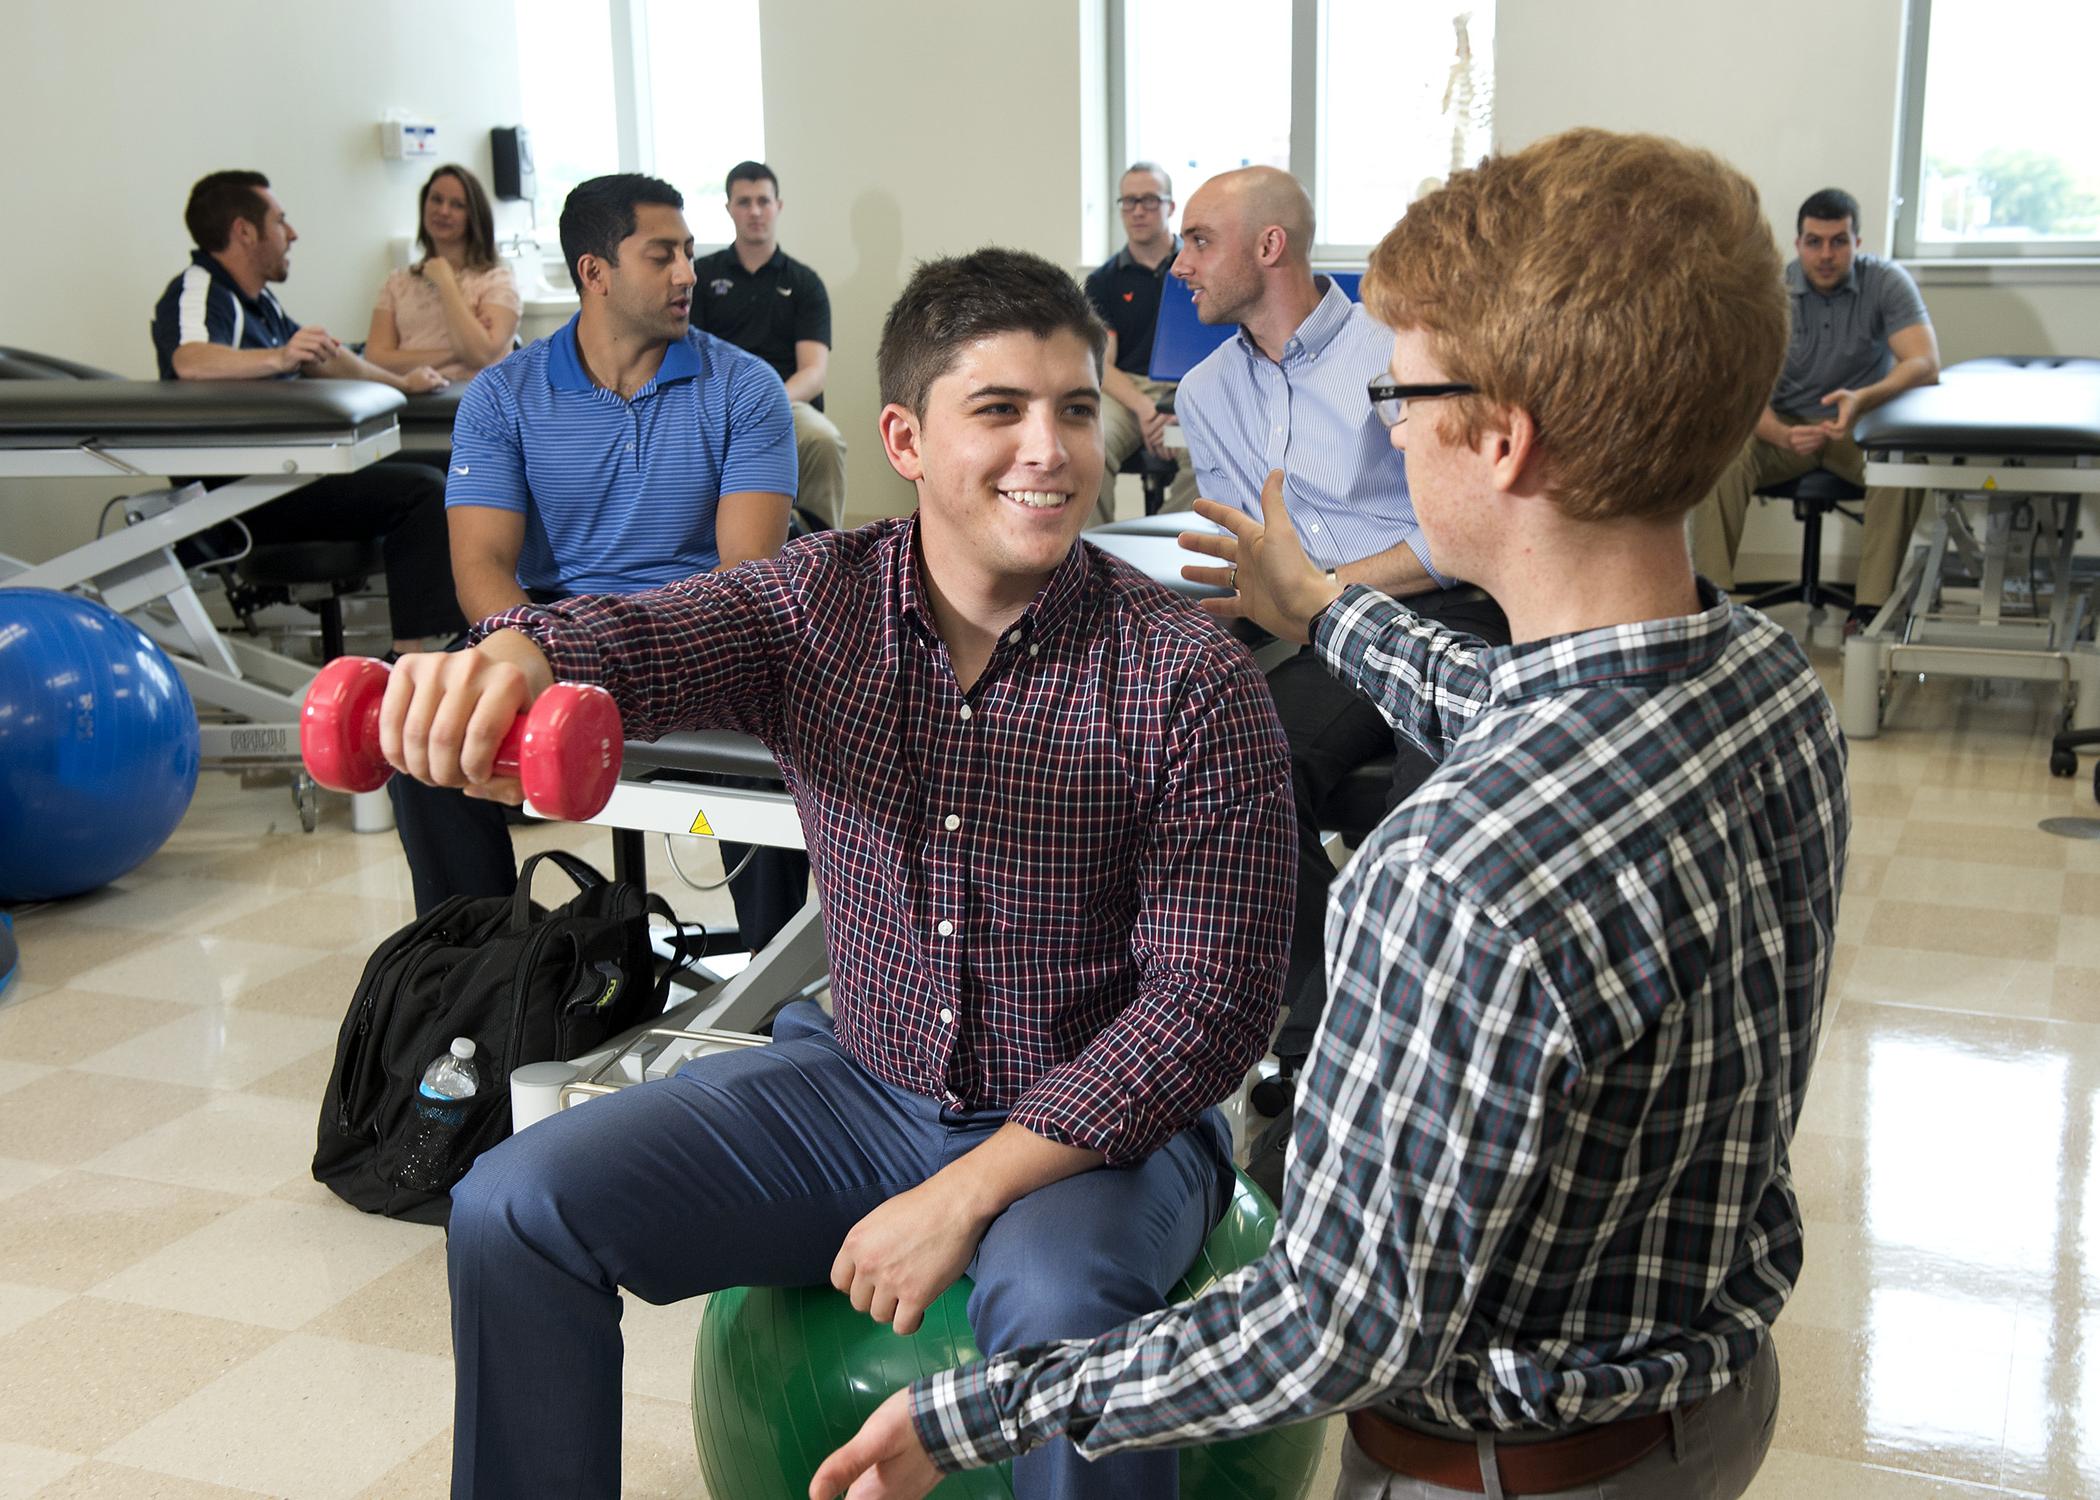 Physical therapy students demonstrating patient care with weights